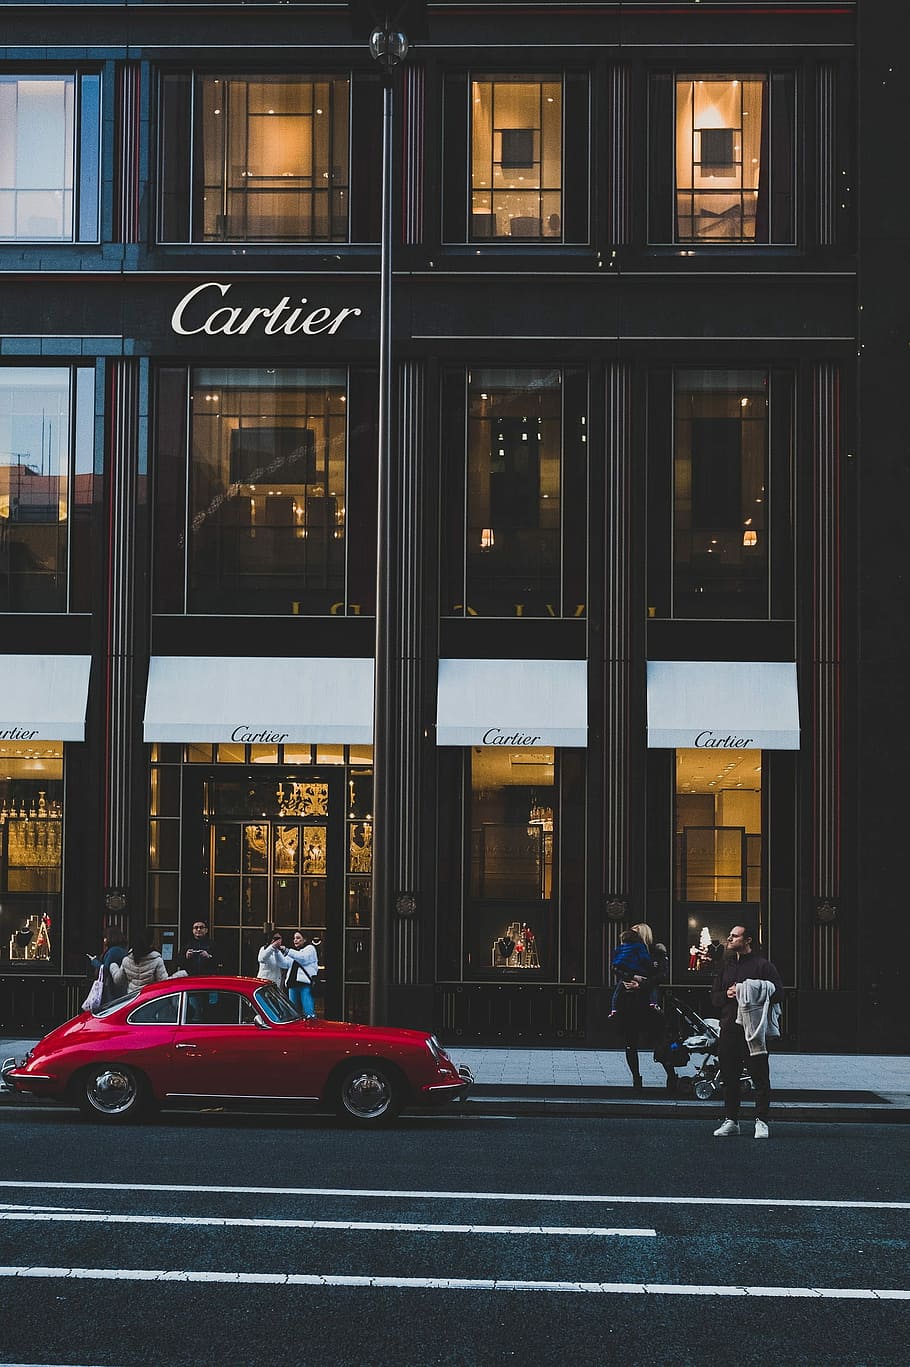 red coupe infront of cartier shop, people outside Cartier building